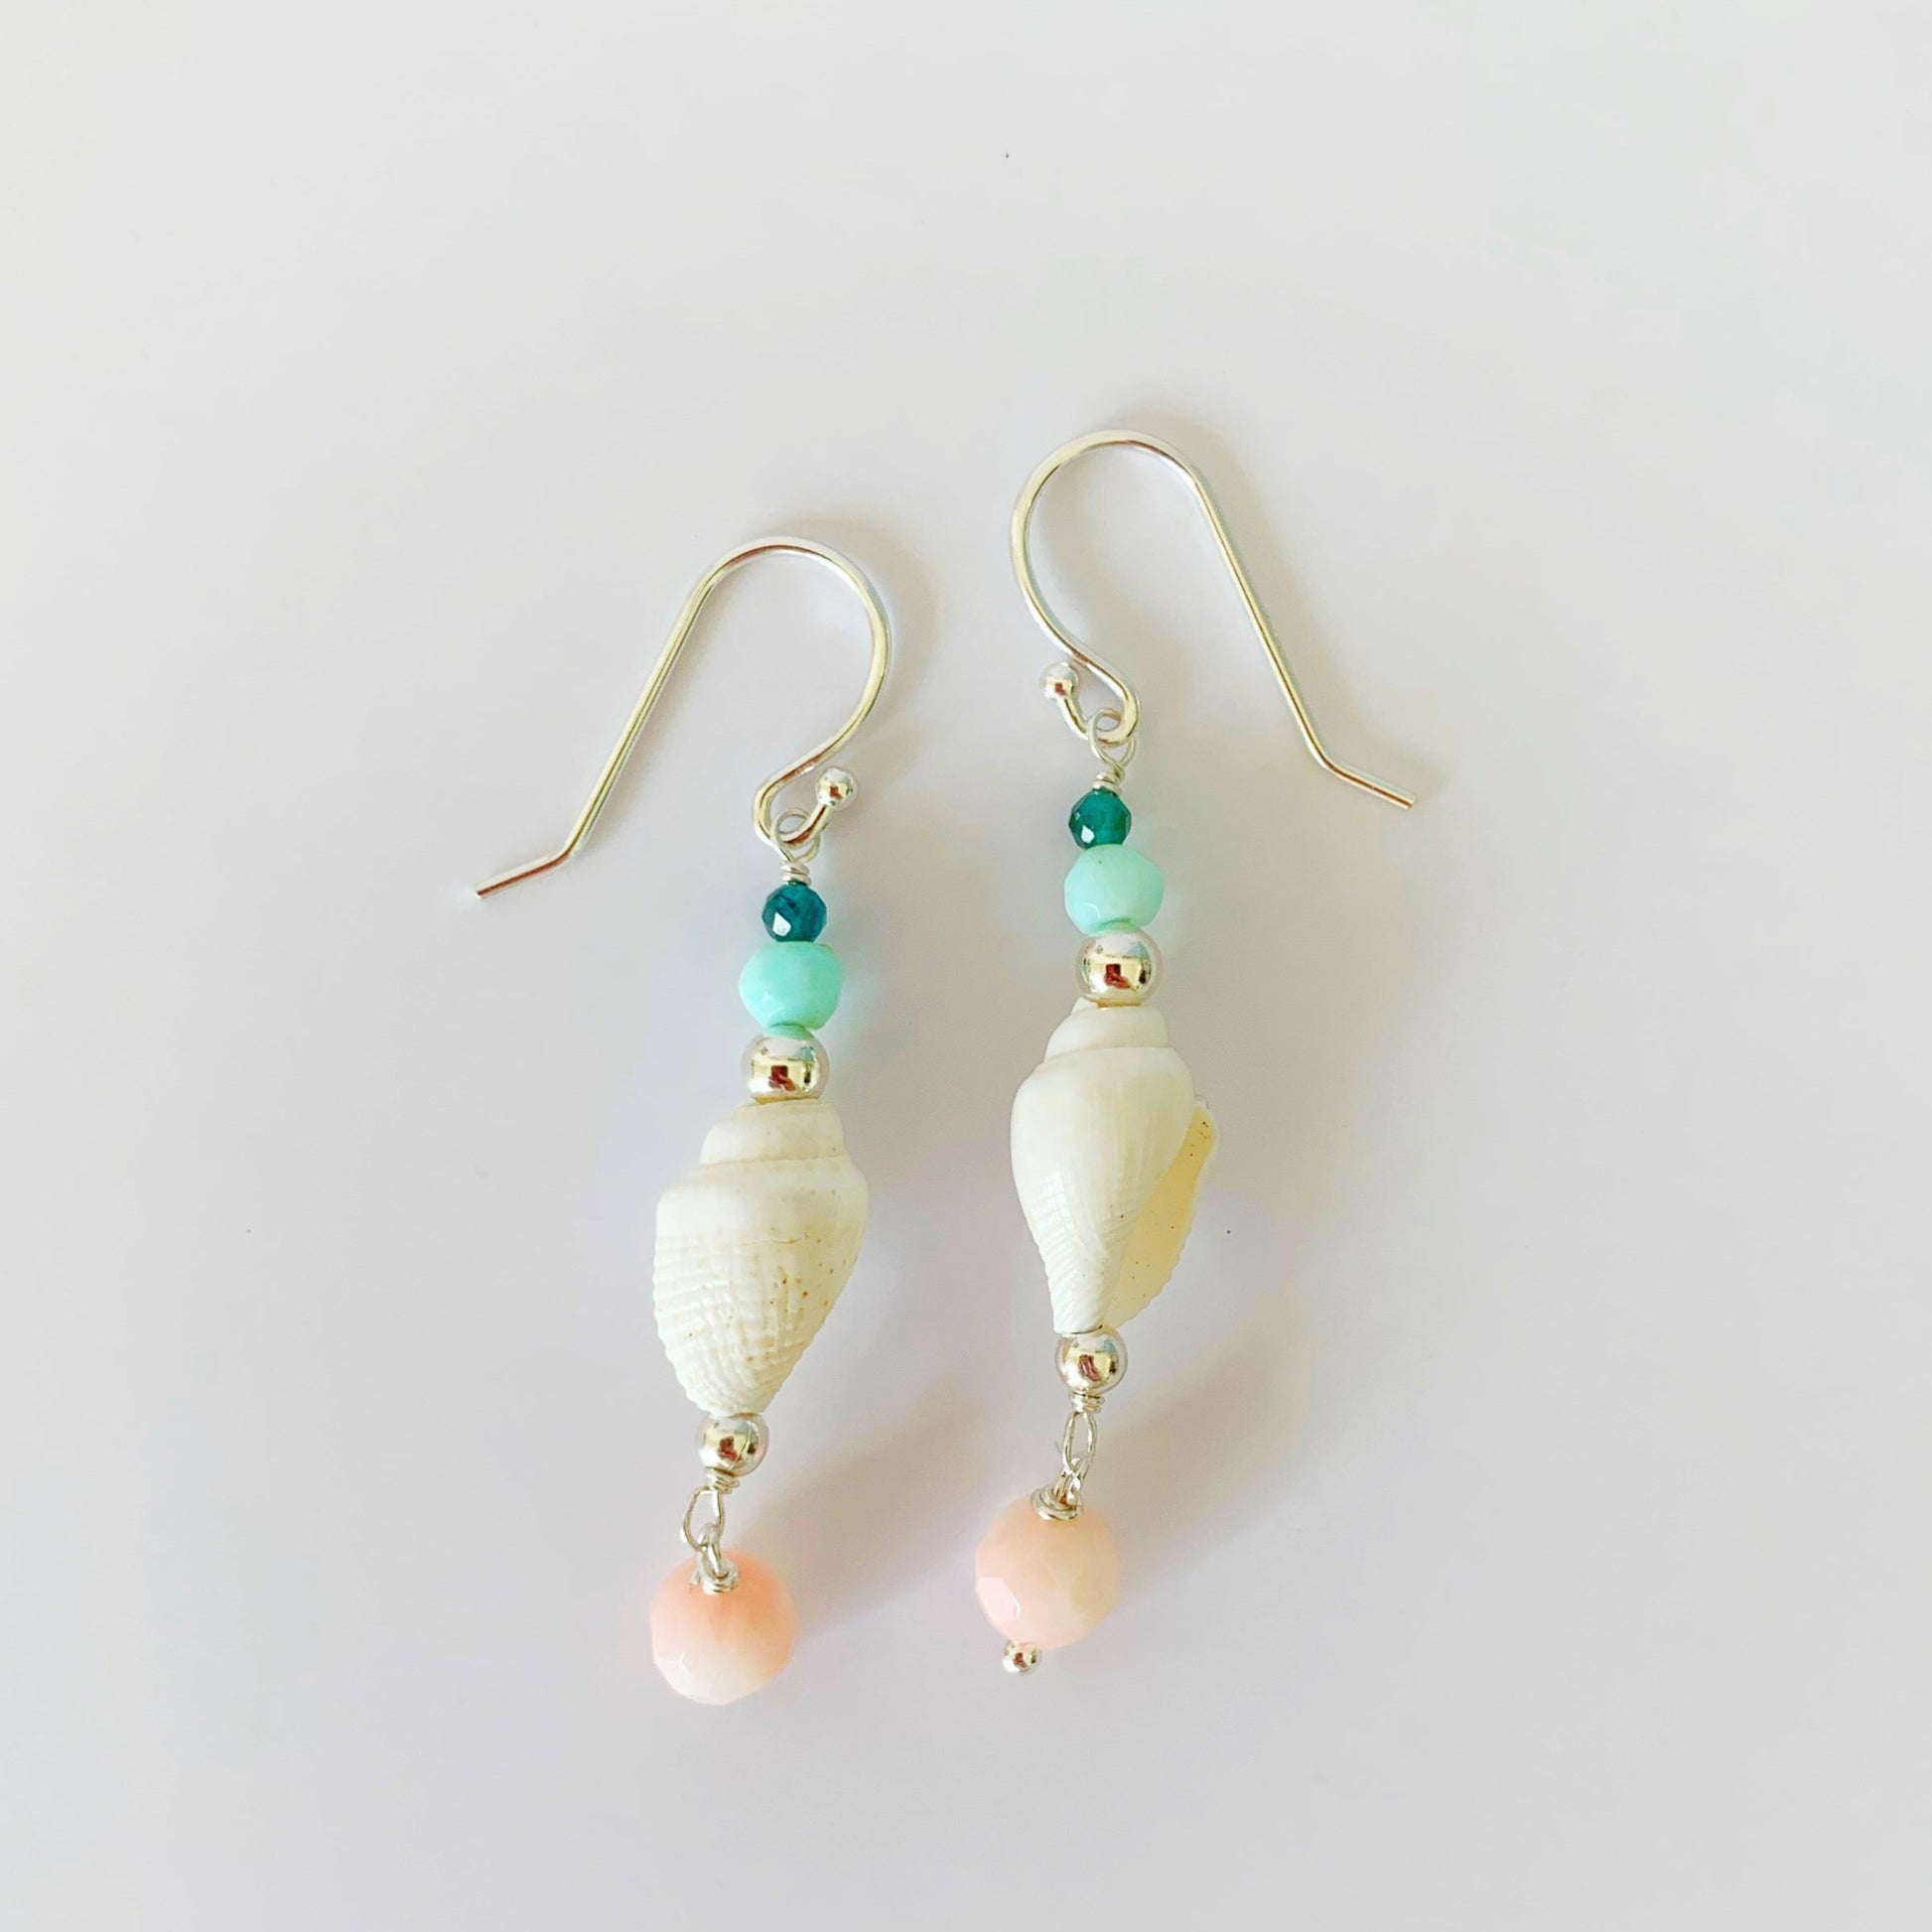 the pool party shellebration earrings by mermaids and madeleines are a linear drop style earrings with a shell at the center complimented by Peruvian opal, apatite, and with a coral bead drop at the bottom. this pair is photographed on a white surface